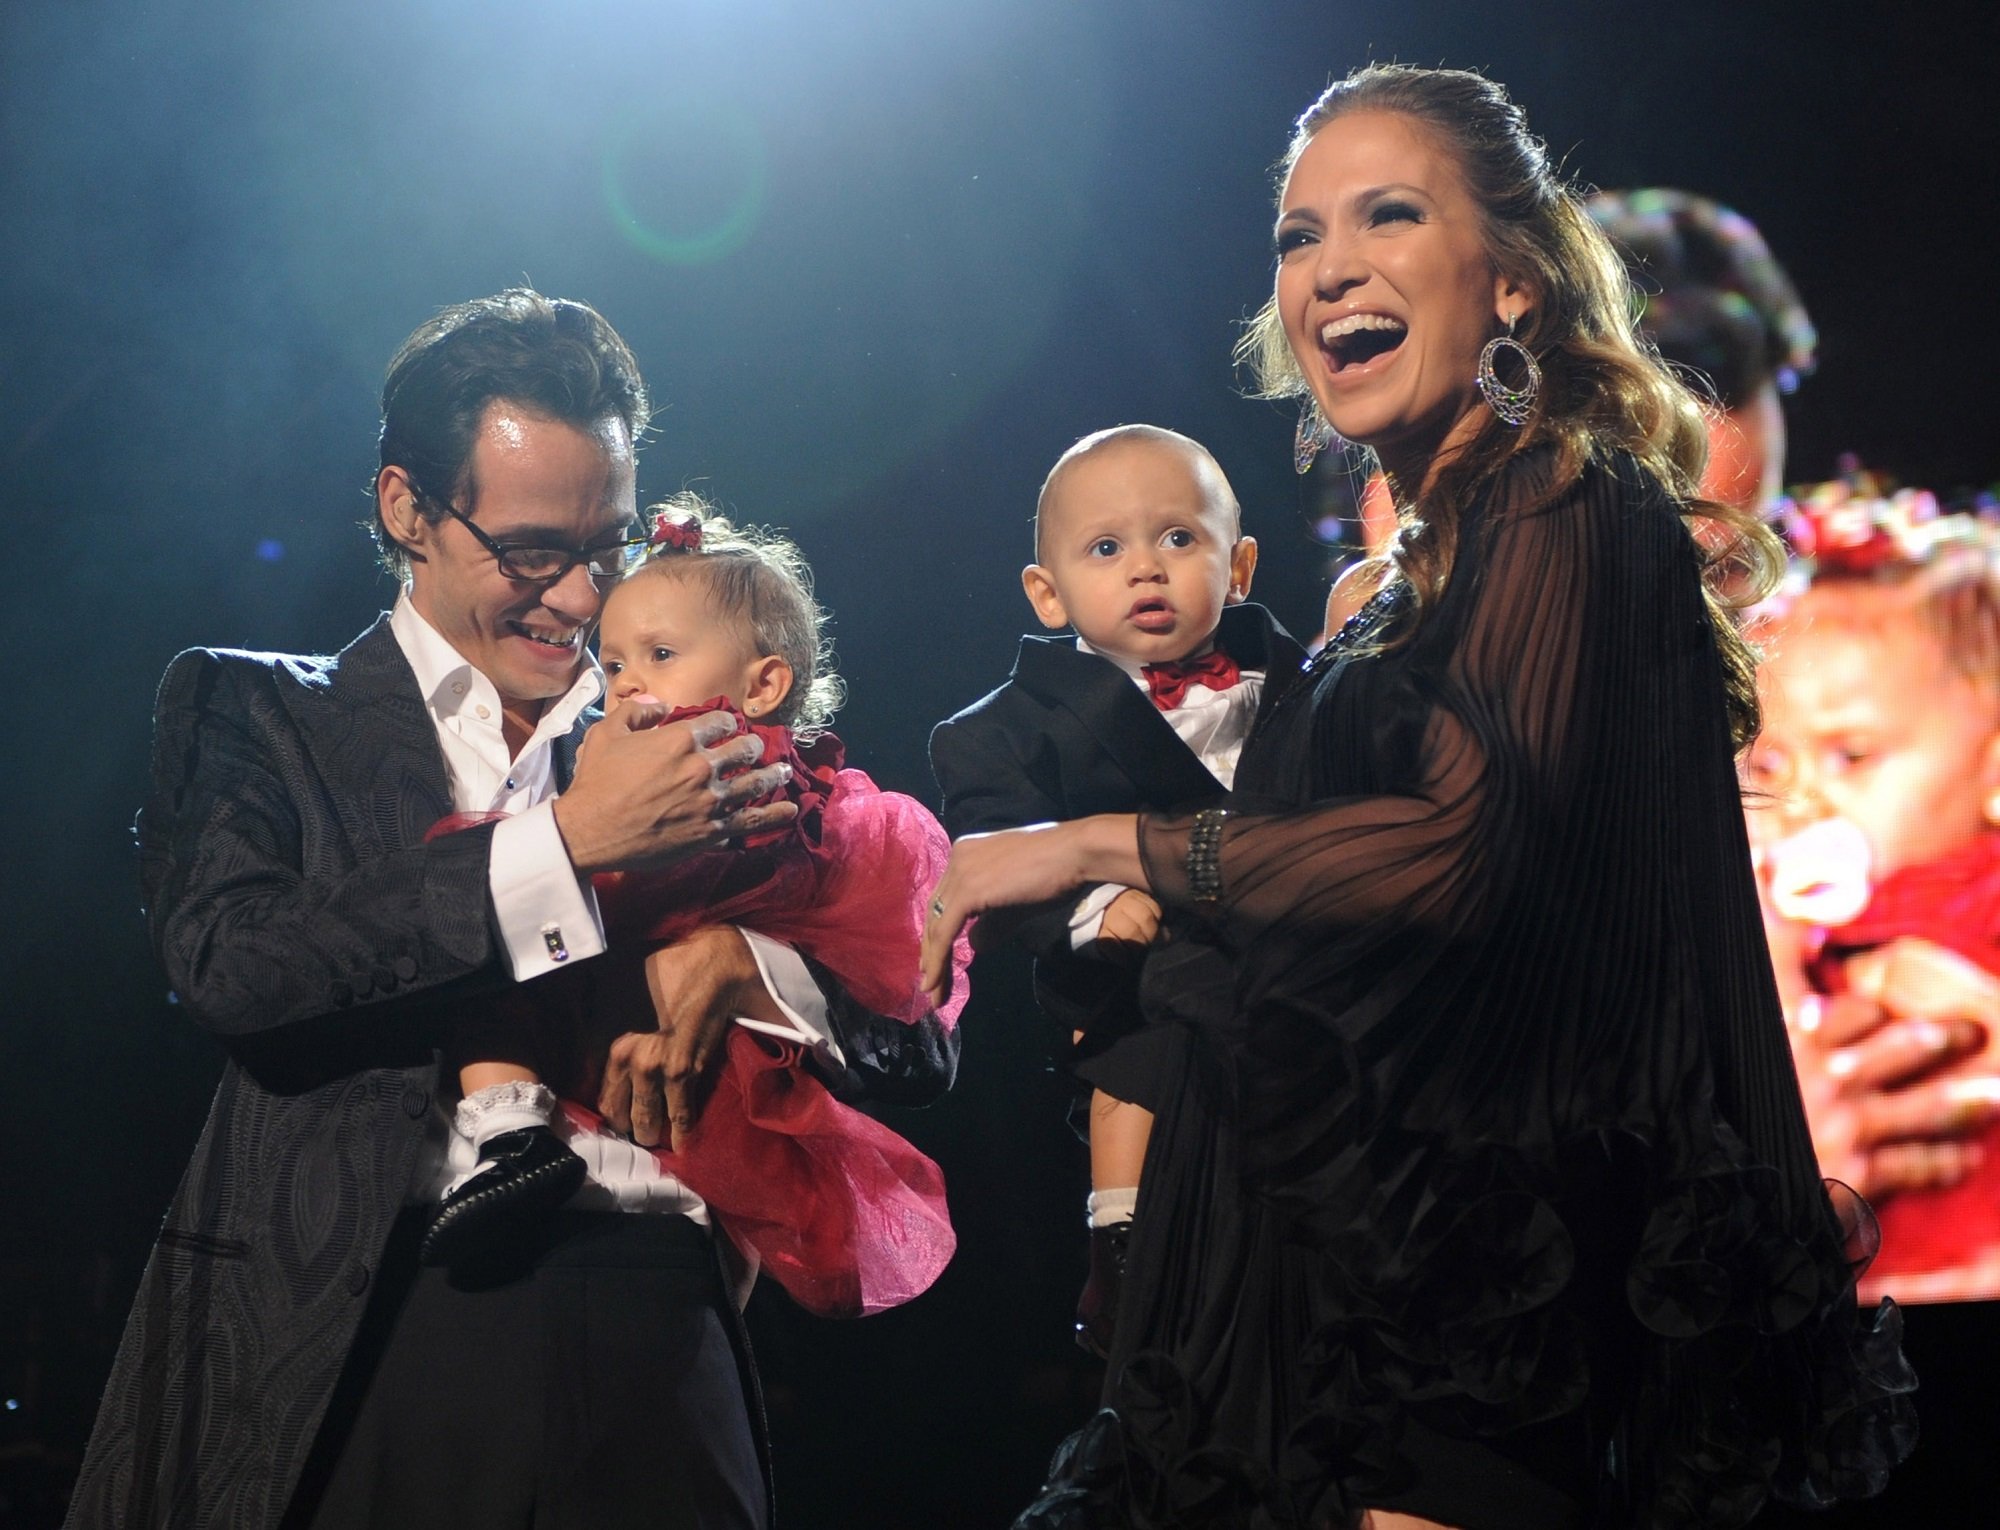 Marc Anthony, Jennifer Lopez and their kids Max and Emme on stage before he performs Valentine's Day show at Madison Square Garden on February 14, 2009 in New York City.